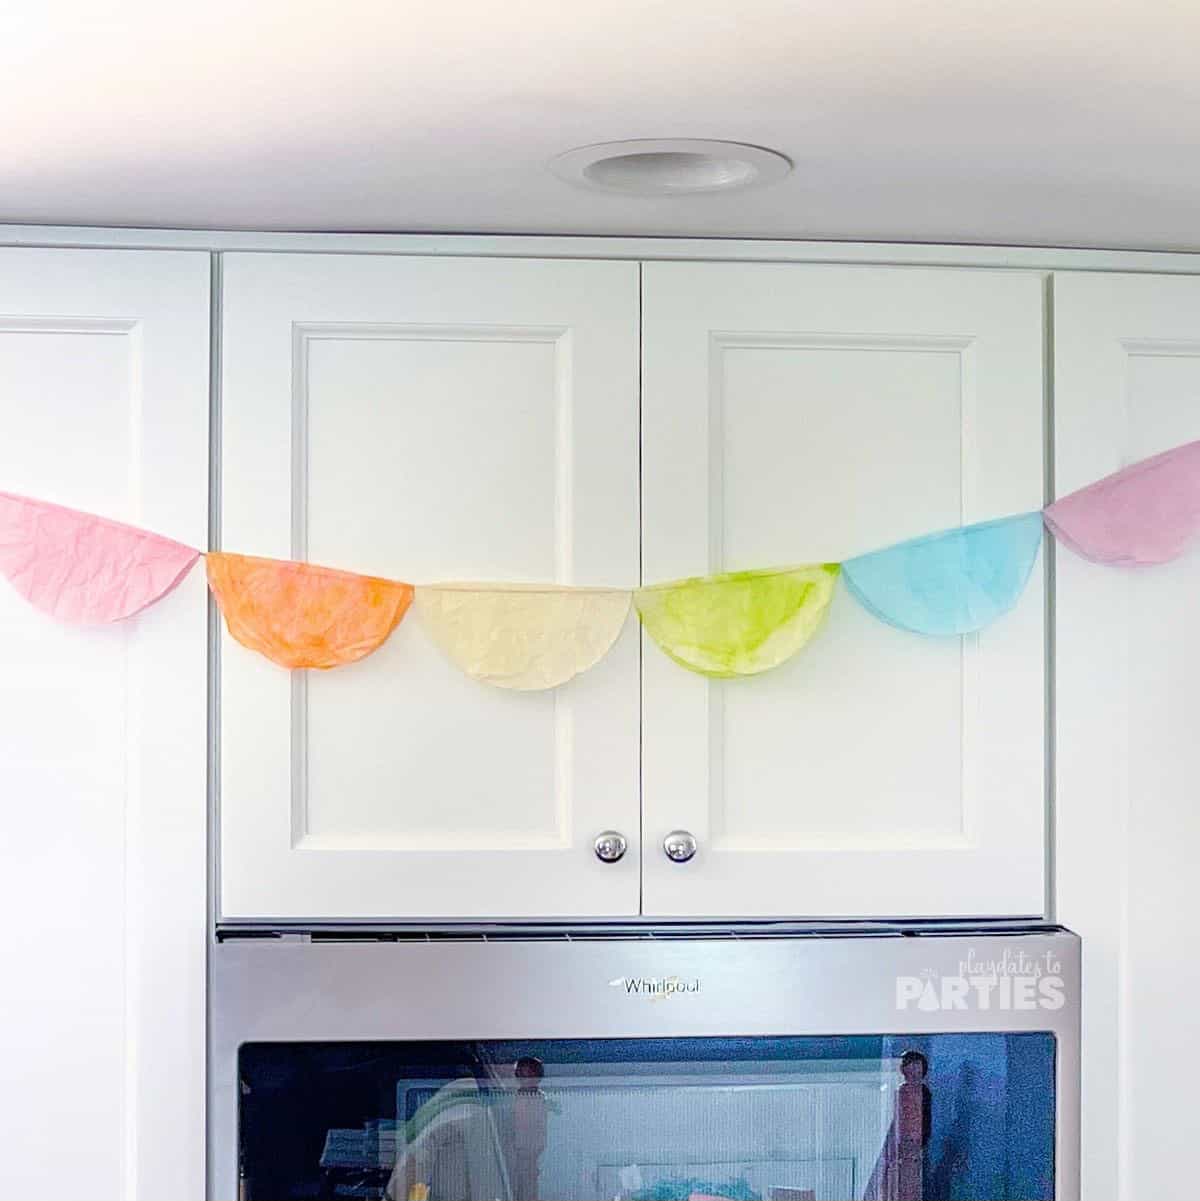 A rainbow colored coffee filter banner hung across white kitchen cabinets.